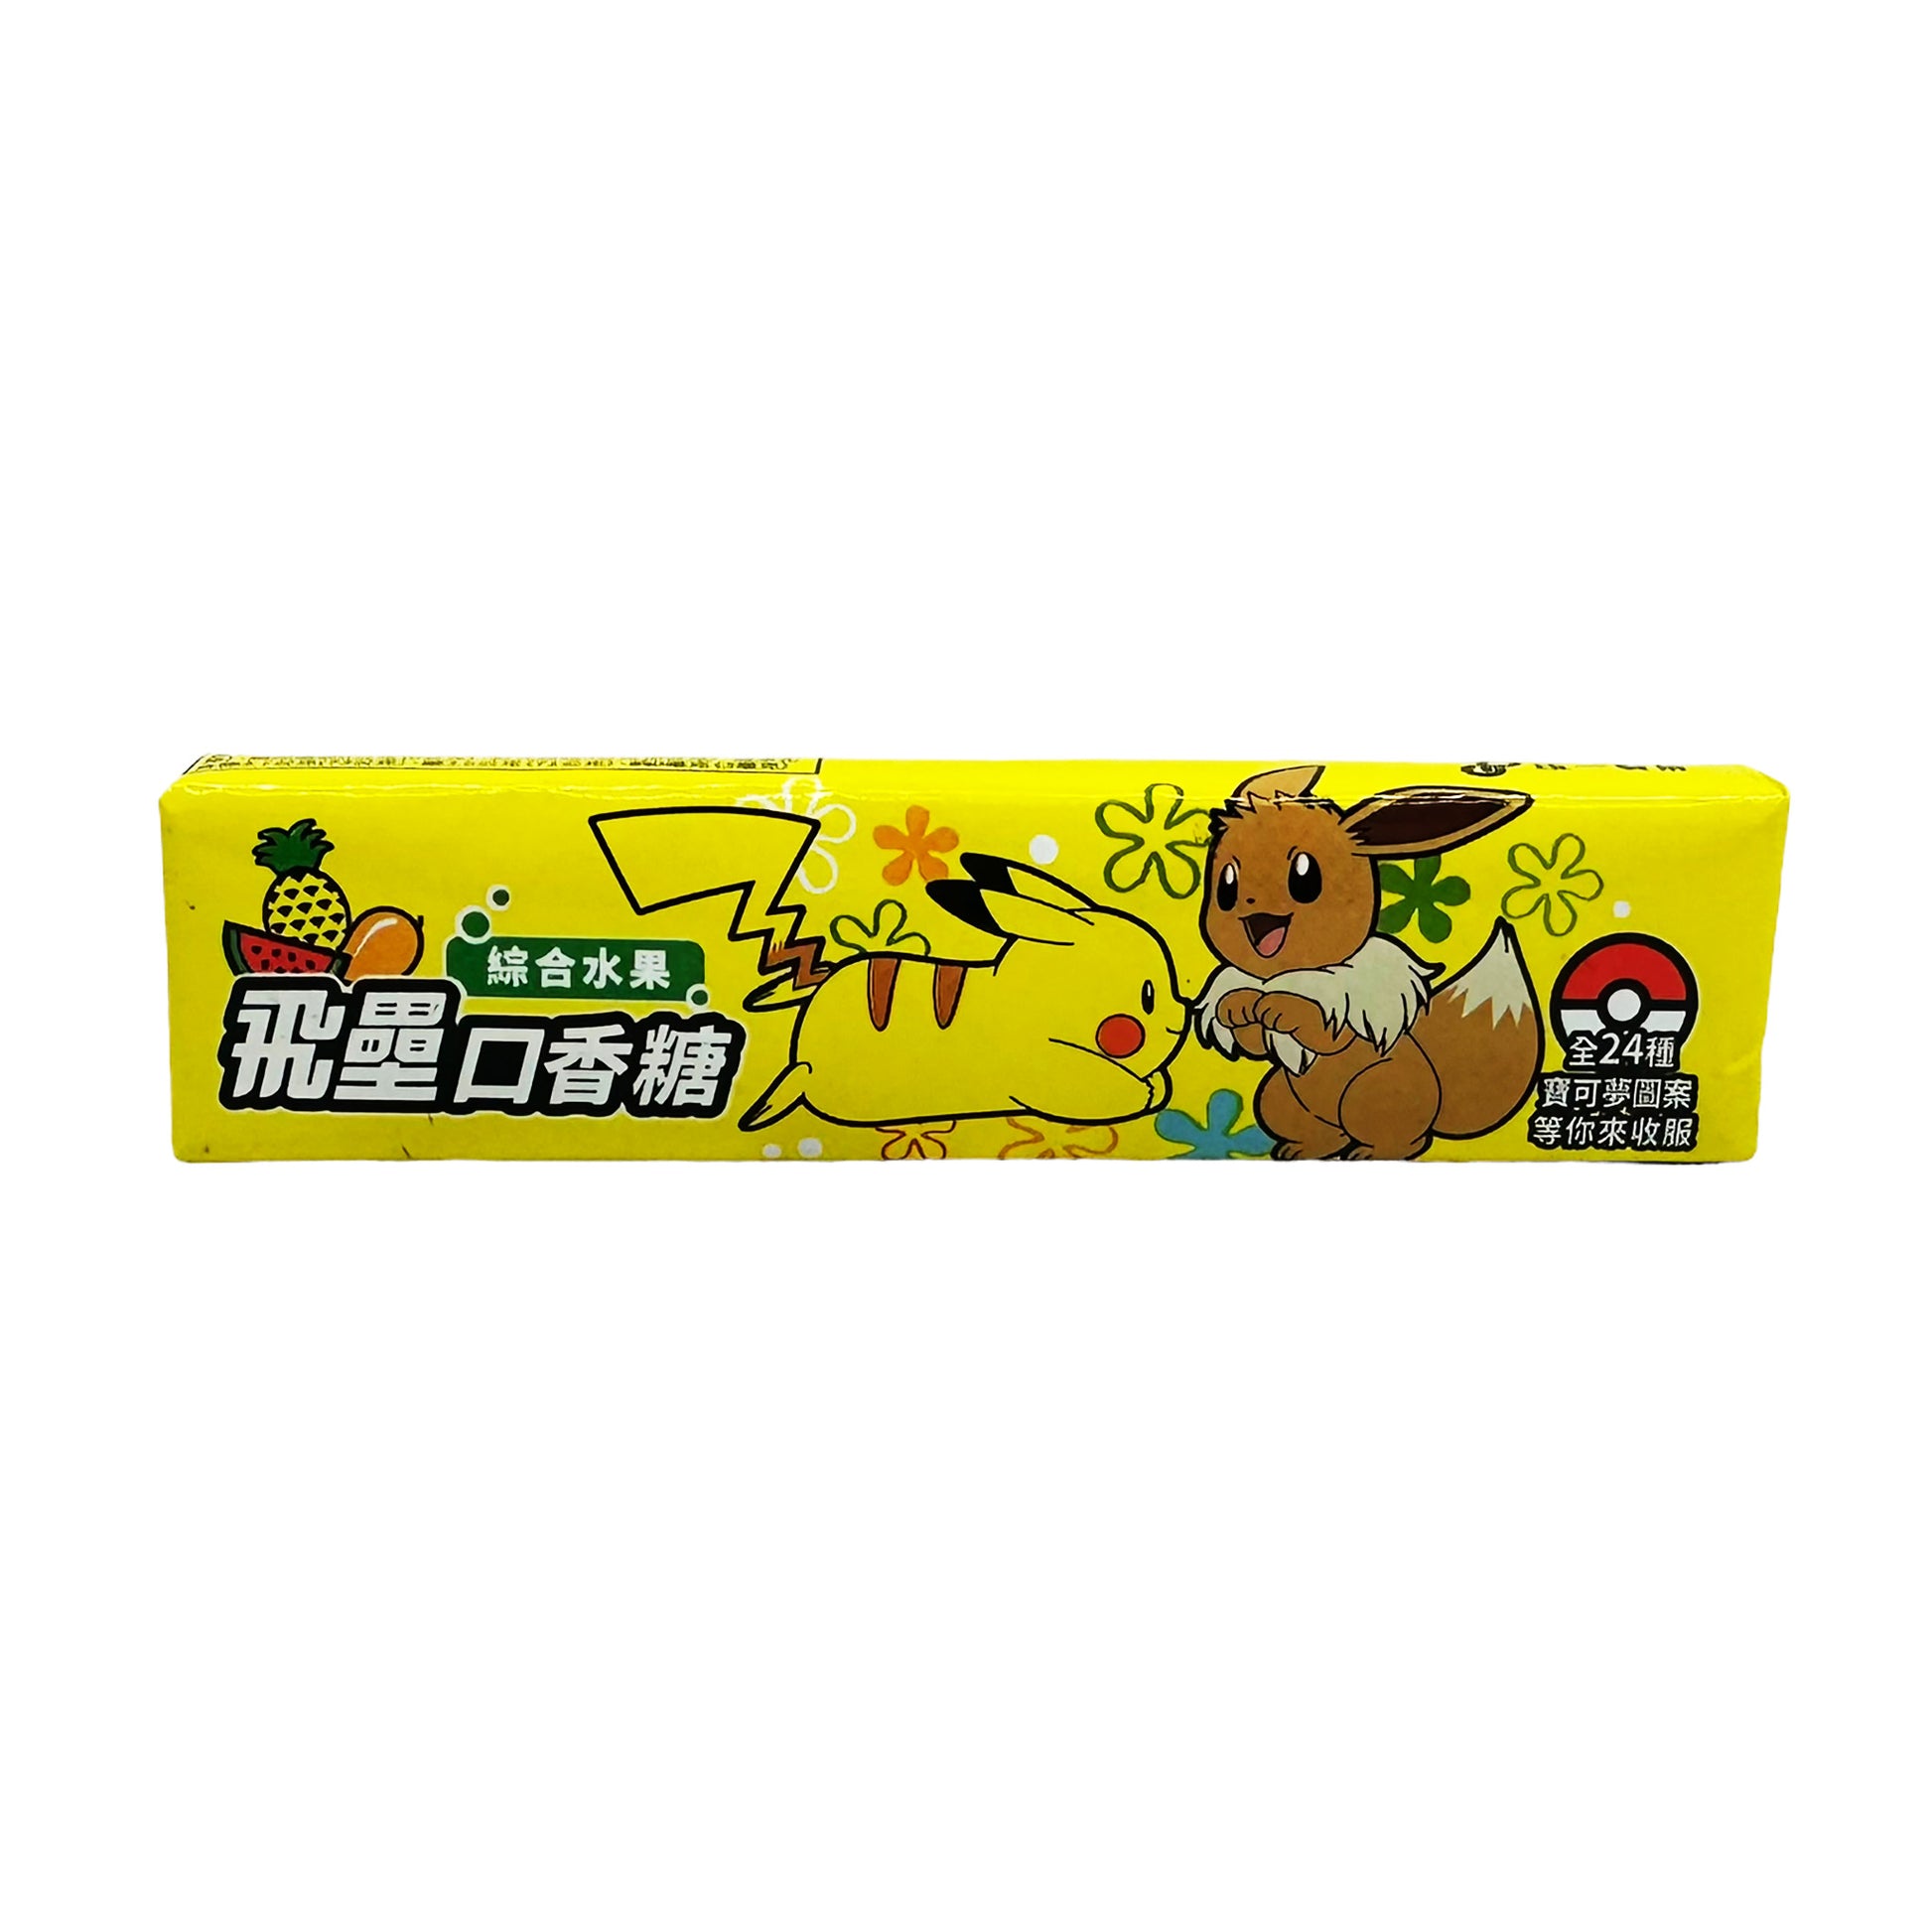 Front graphic image of President Candy Pokemon Bubble Gum - Assorted Fruit Flavor 0.88oz (25g)